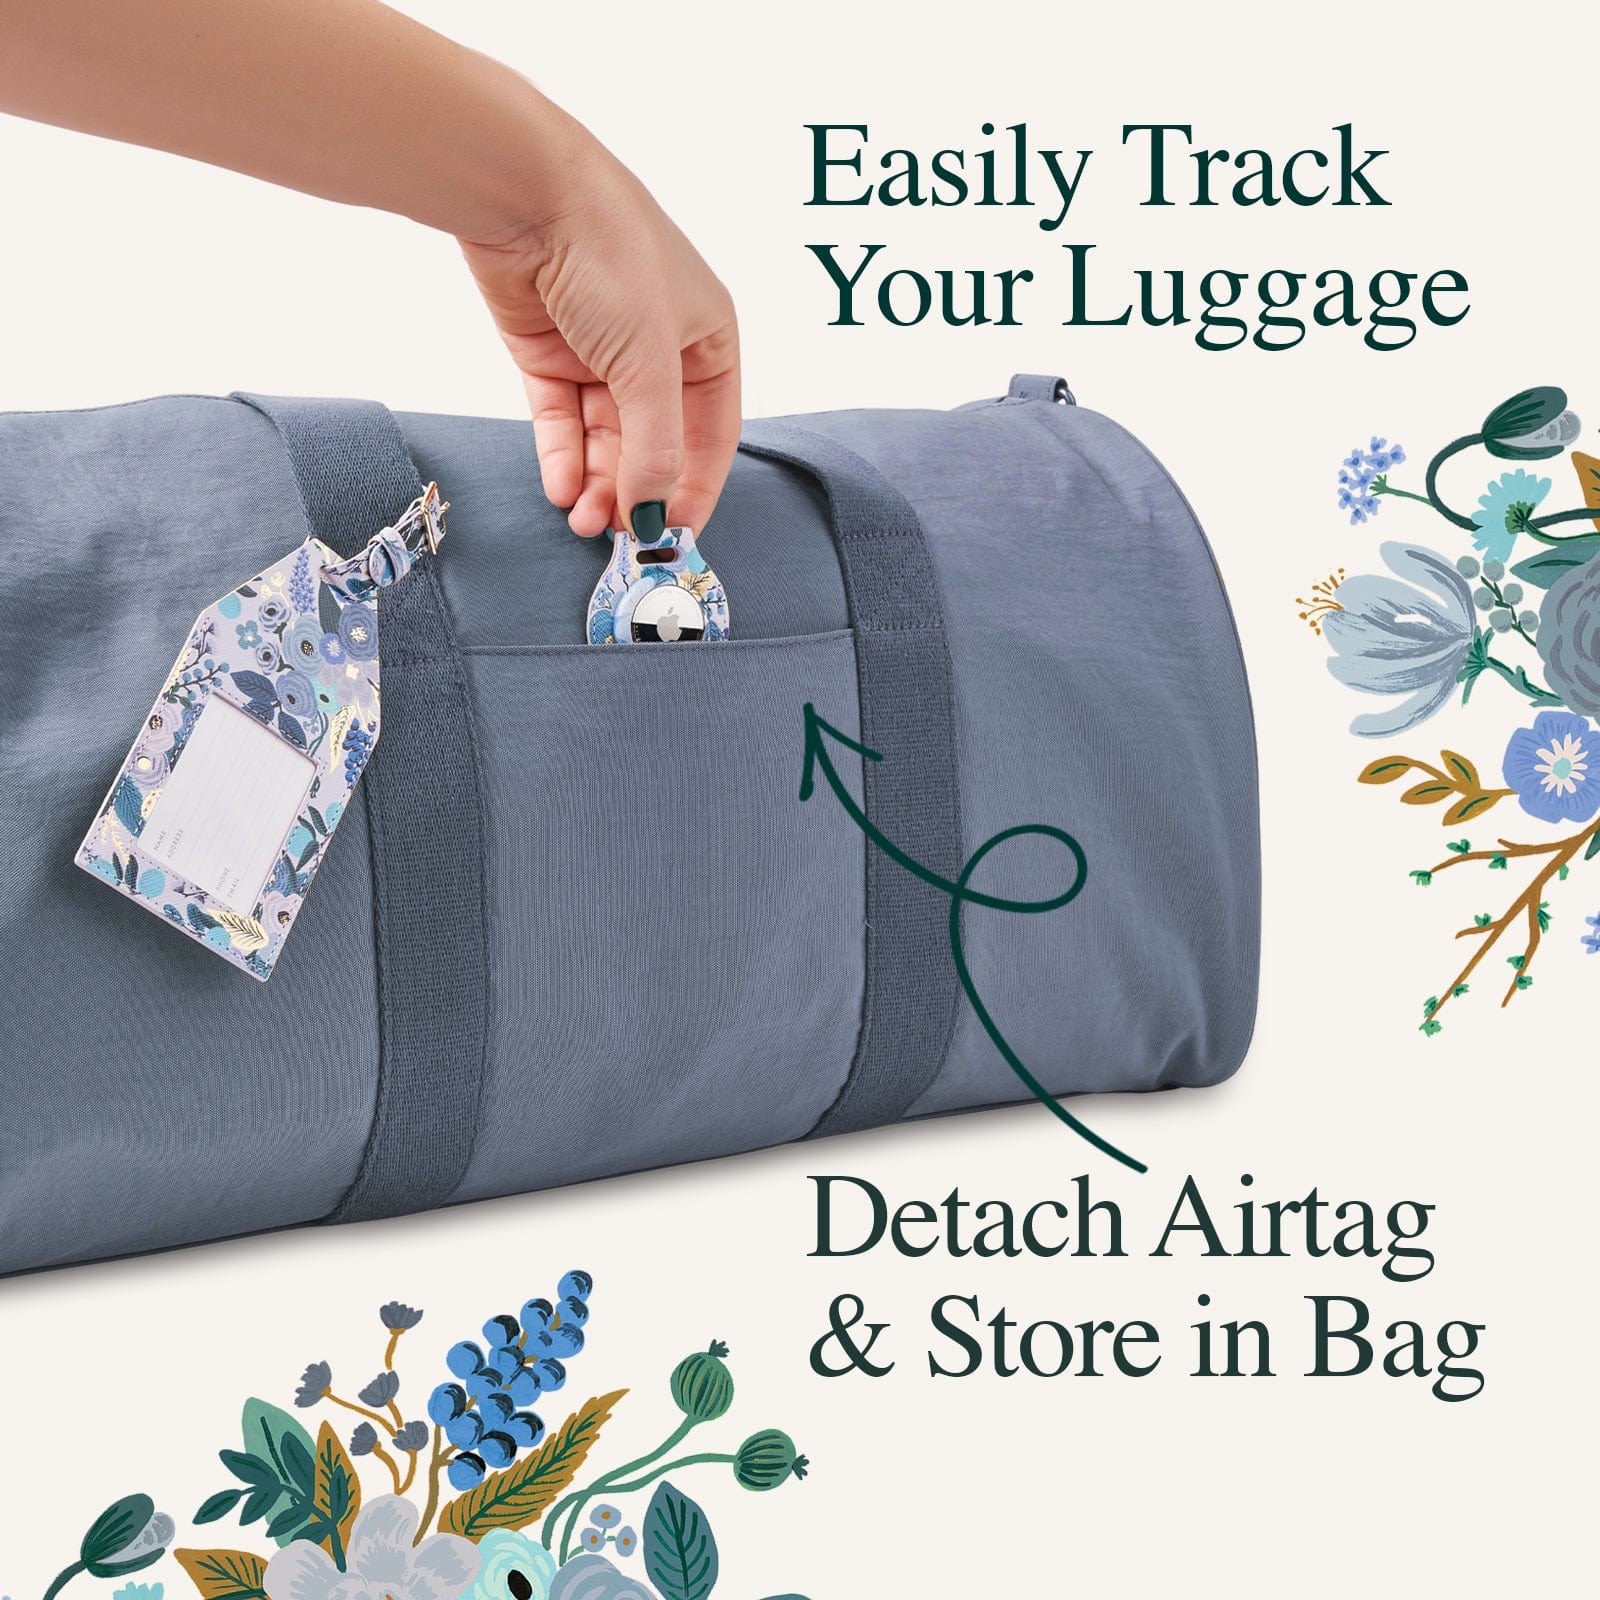 Easily track your luggage. Detach AirTag & store in bag